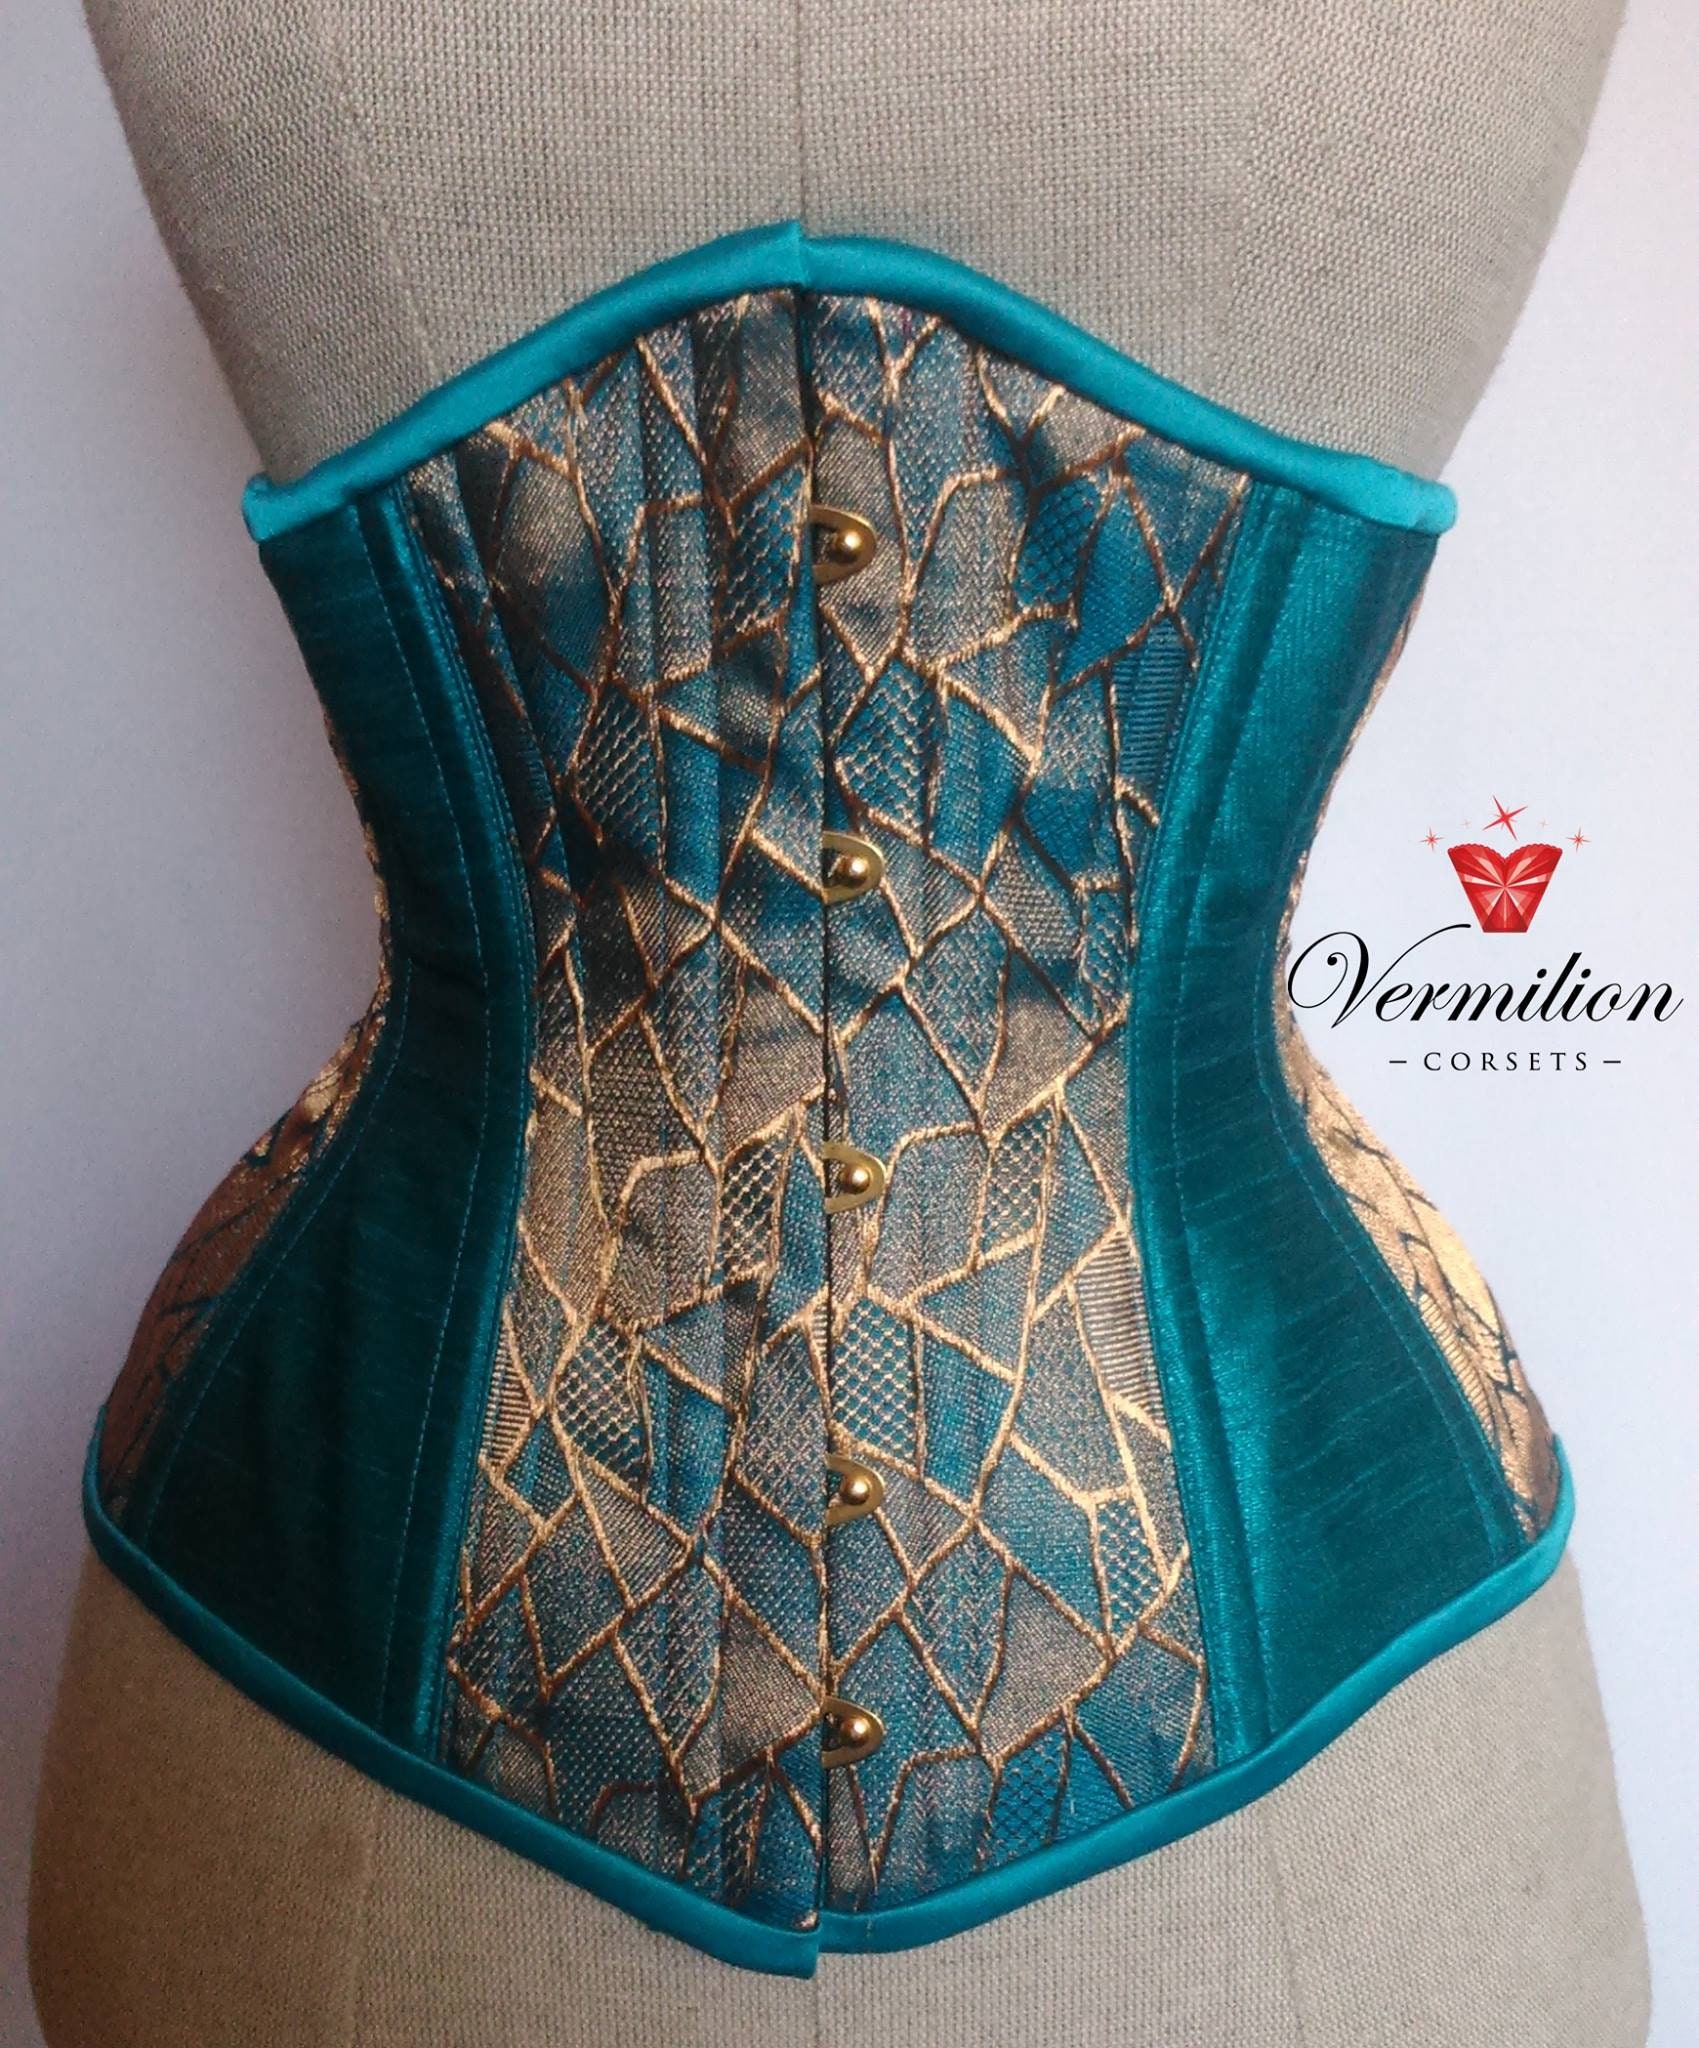 How do I style this turquoise embroidered corset? : r/fashionadvice